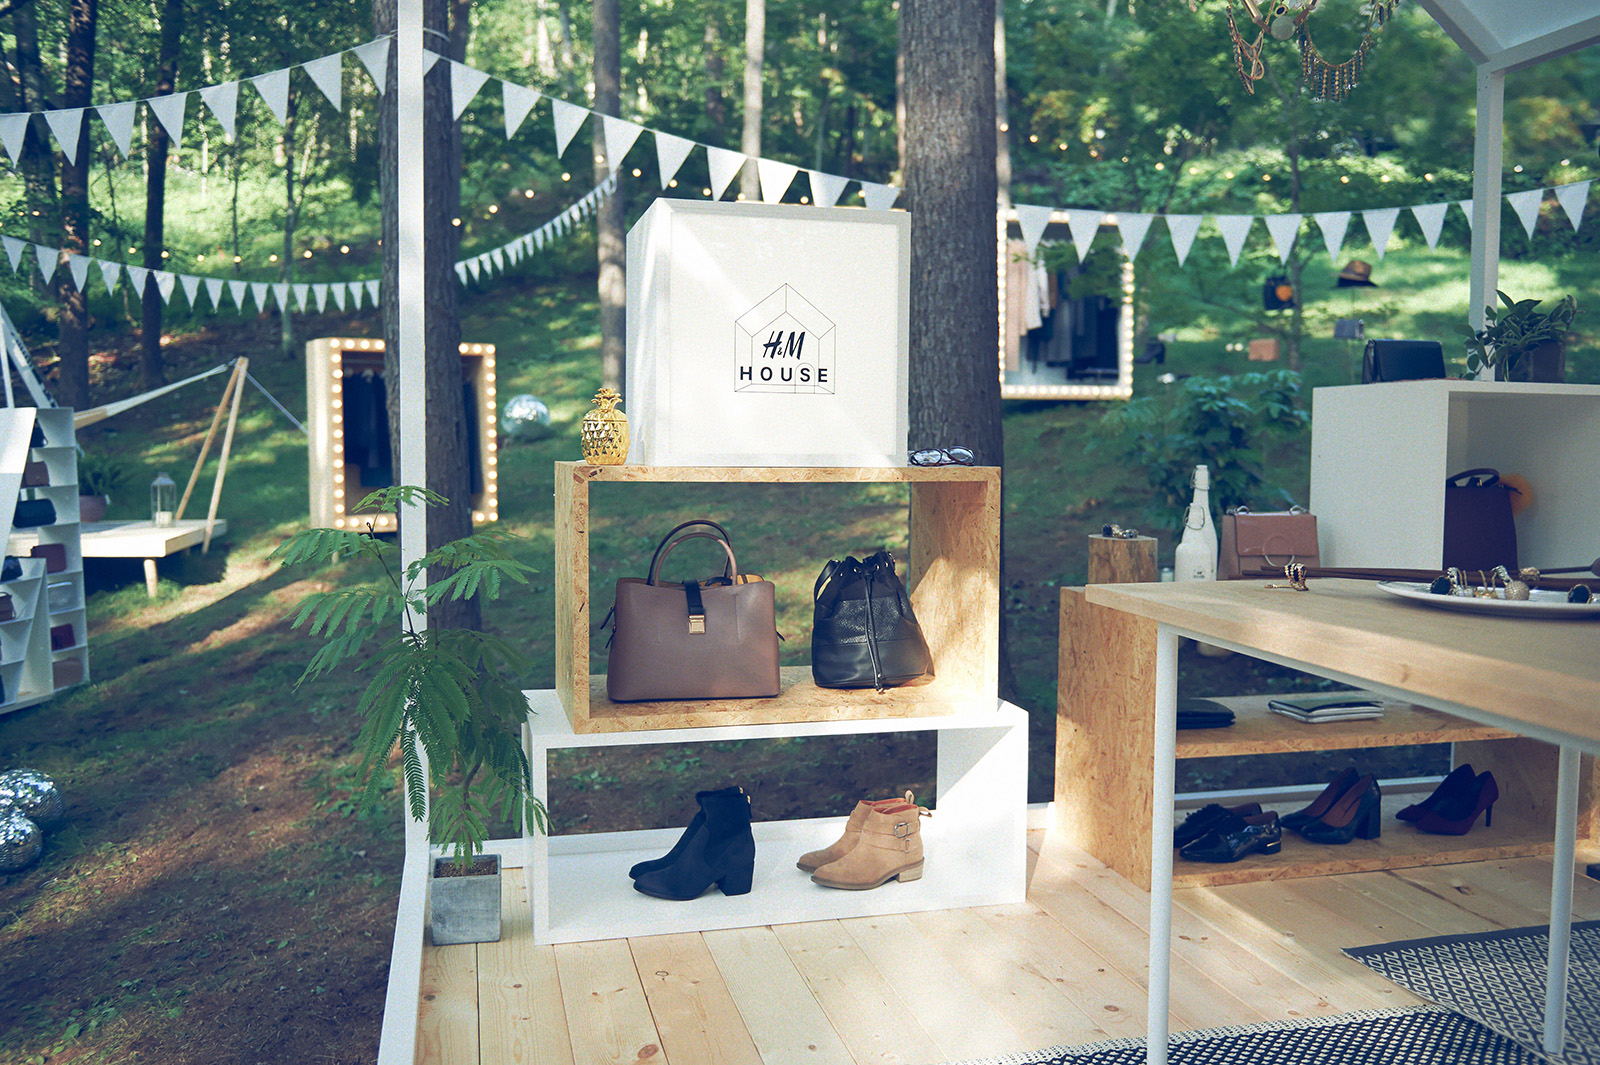 h&m-house_forest_15-2